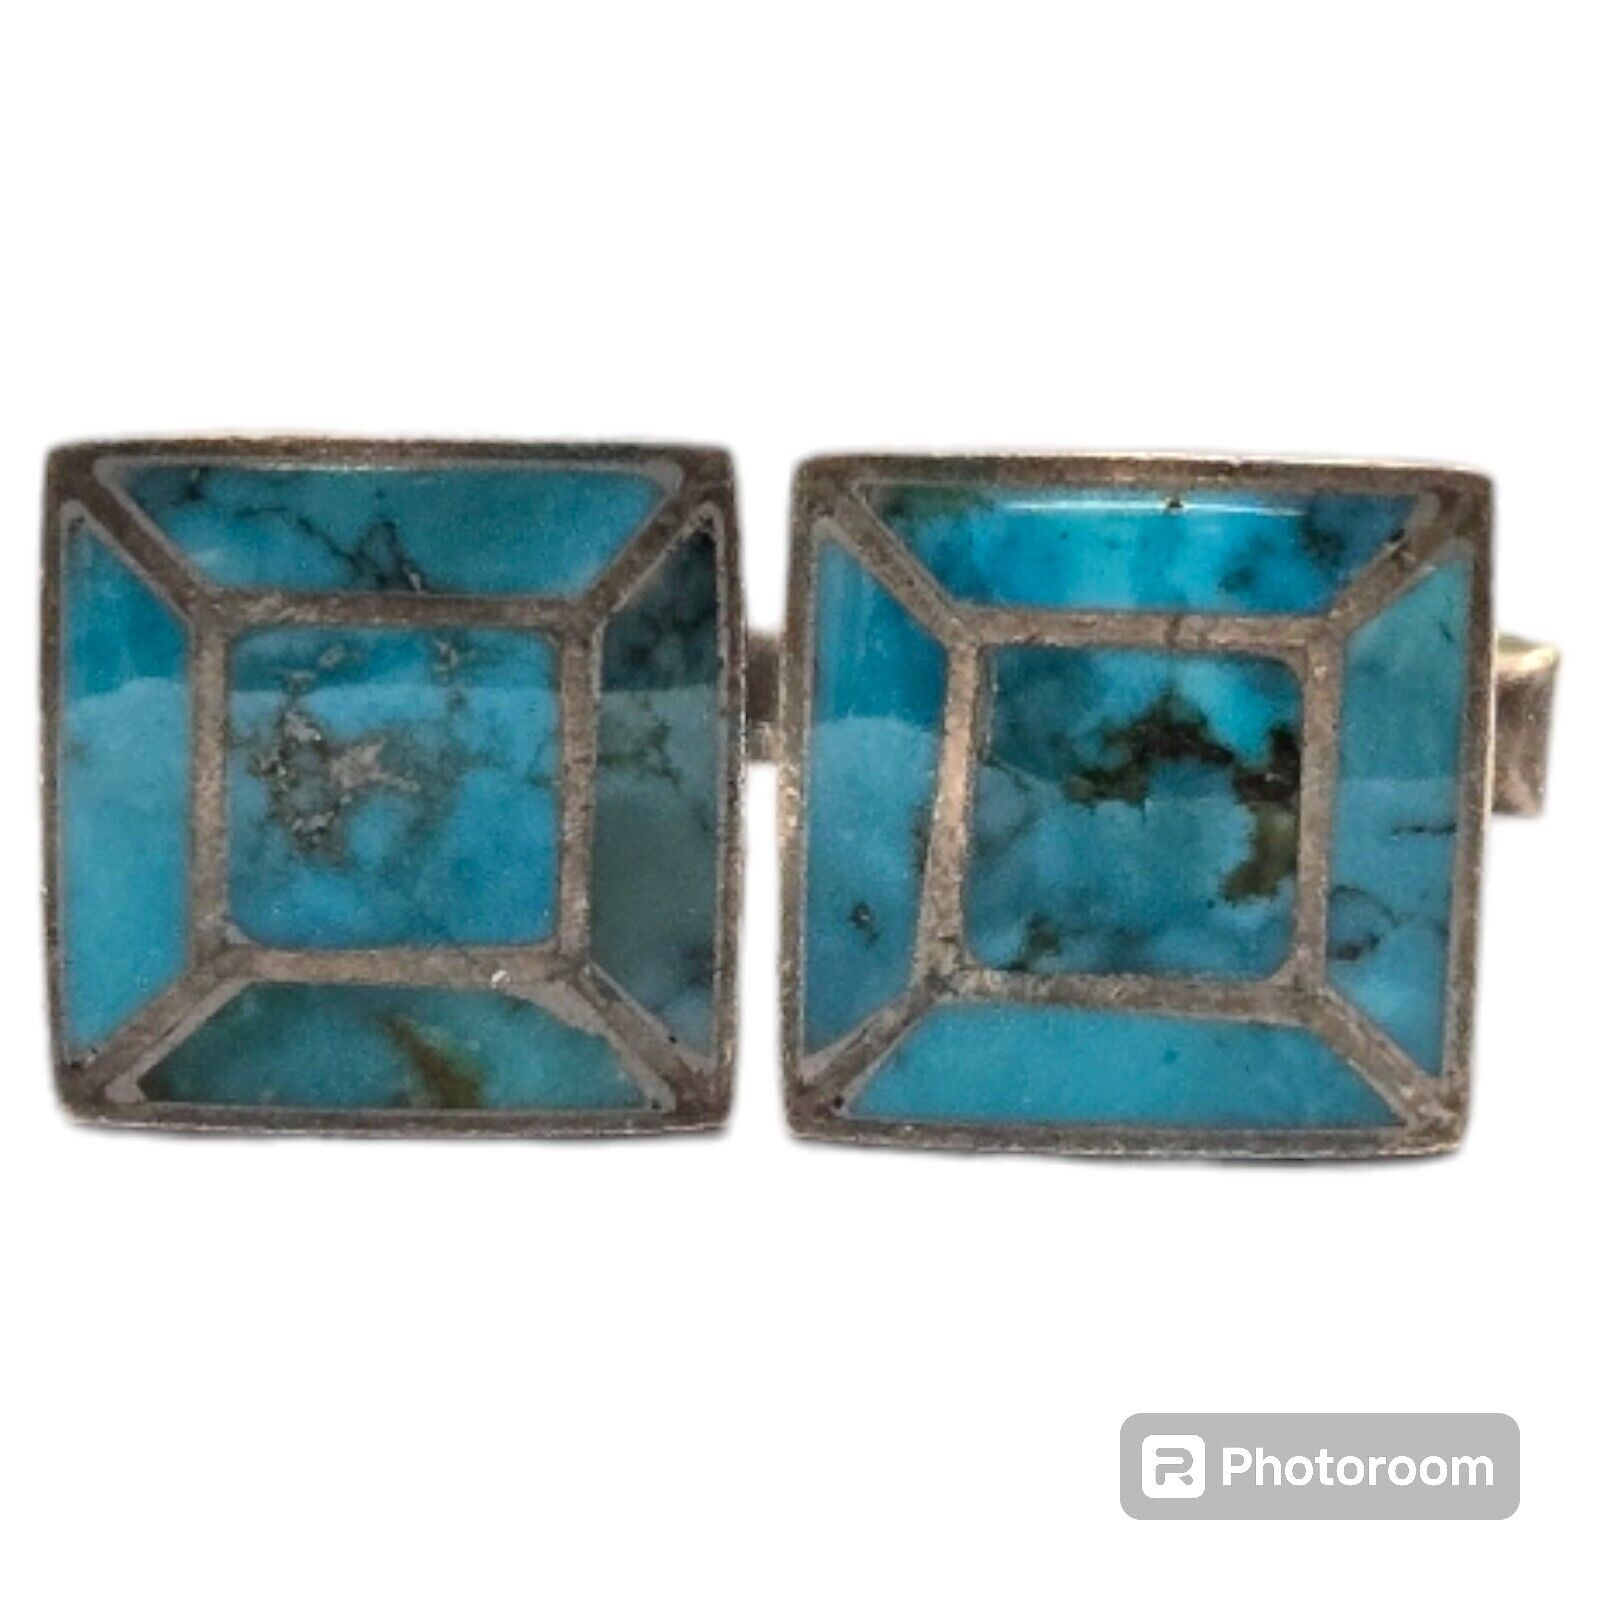 INCREDIBLE VINTAGE NAVAJO TURQUOISE MOUNTAIN STERLING SILVER CUFFLINKS